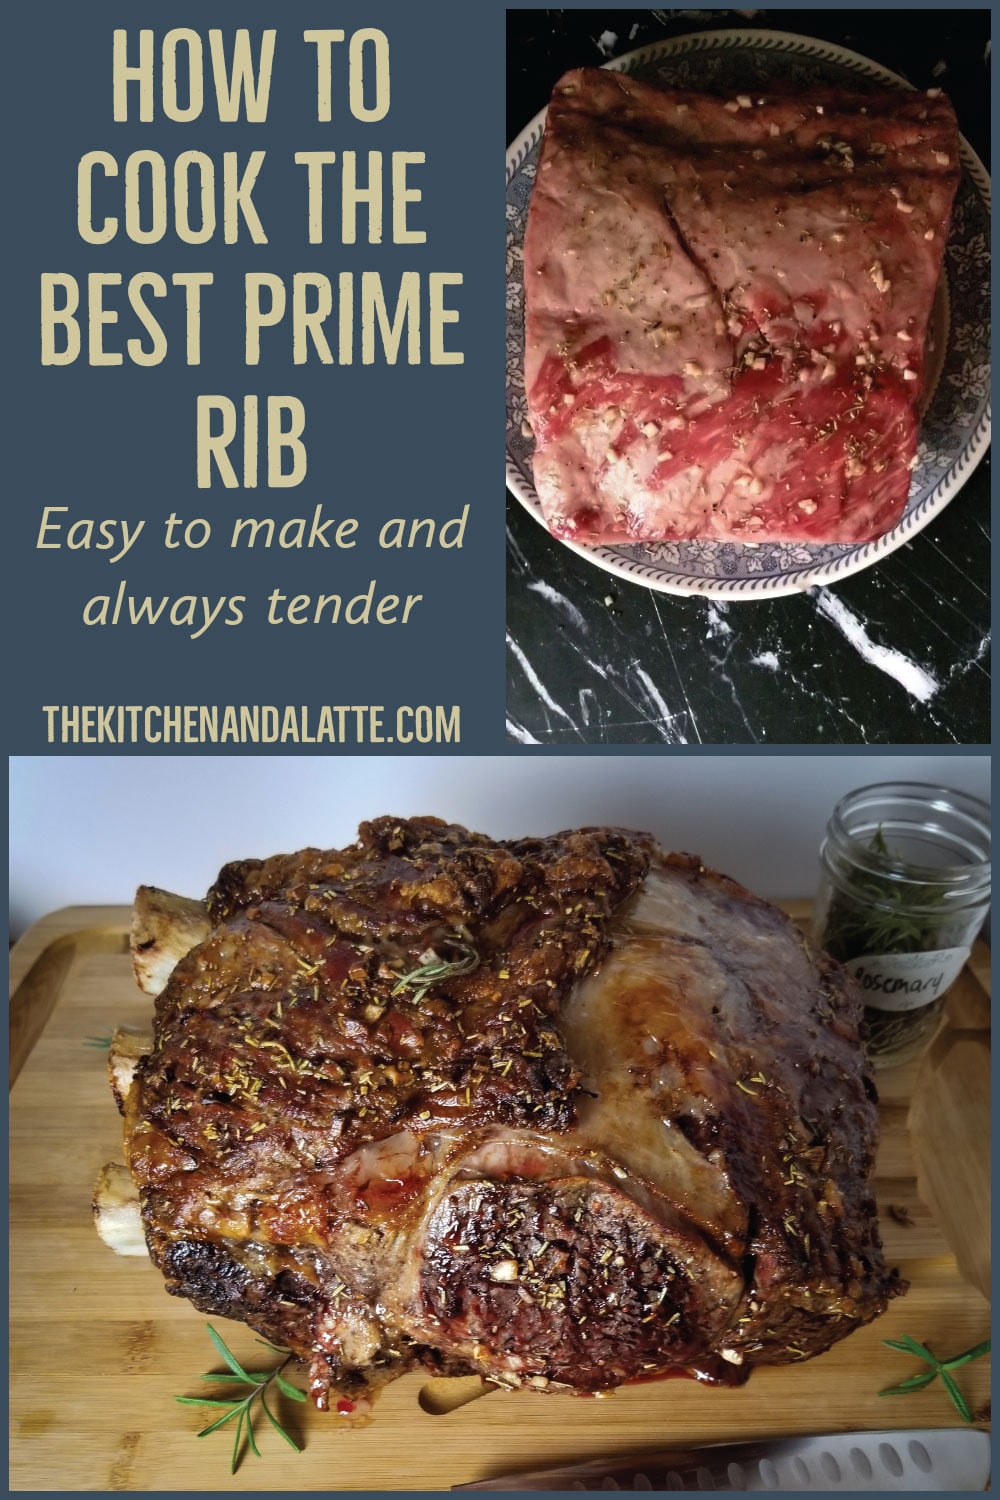 How to cook the best prime rib, easy to make and always tender. Pinterest image - 2 pictures. 1 is a rib roast in a roasting pan with seasonings before baking. Other is rib roast sitting on cutting board after cooking ready to be cut.